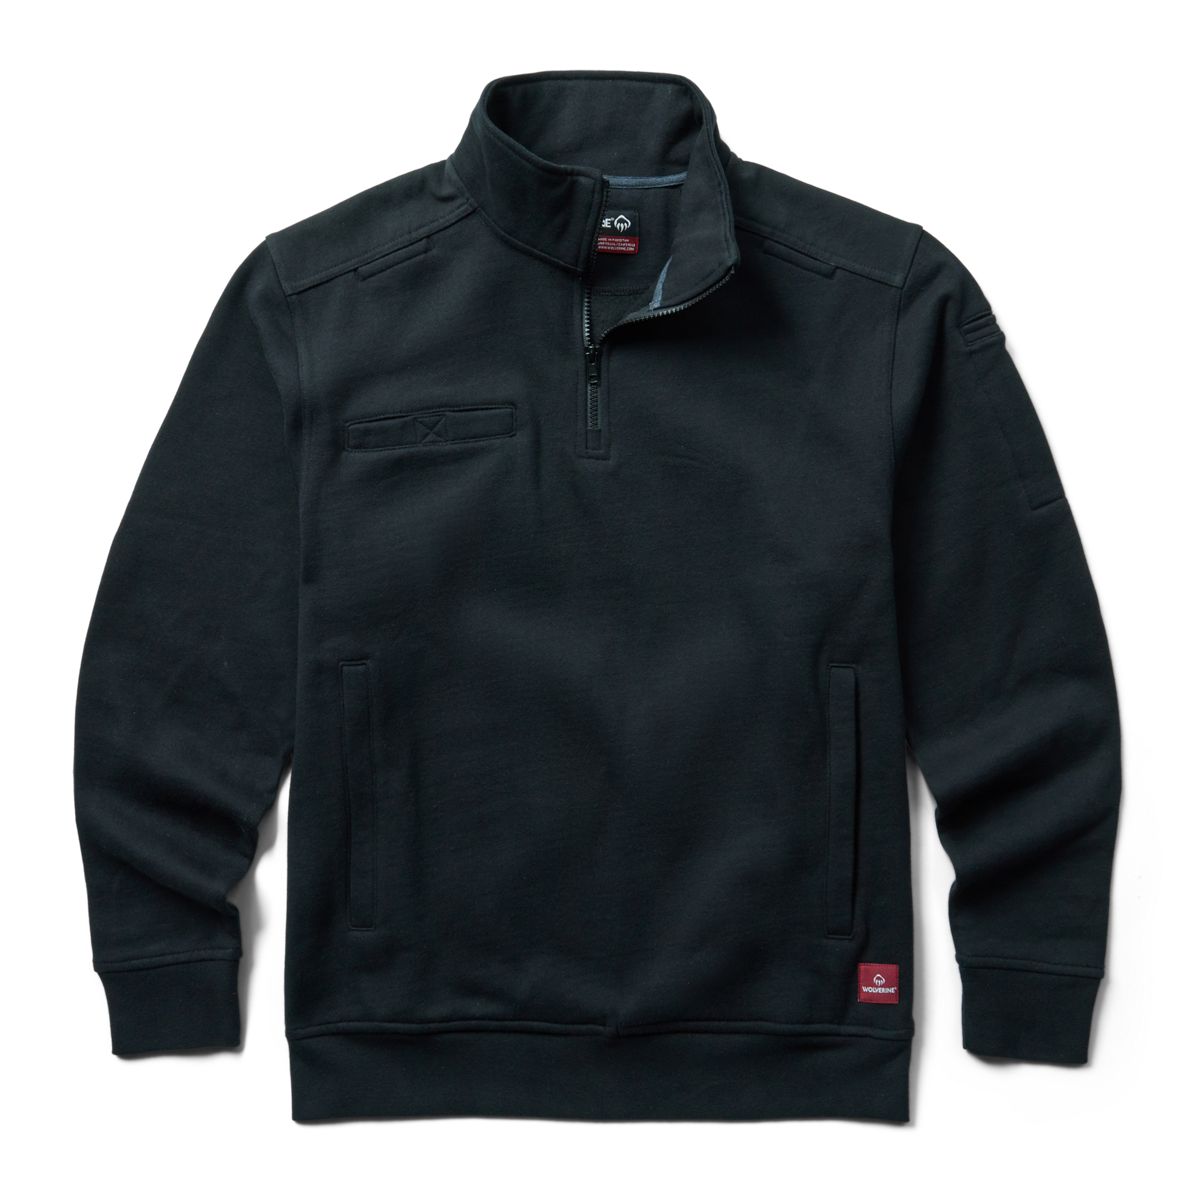 Men's Tops, Shirts, Jackets & Pullovers